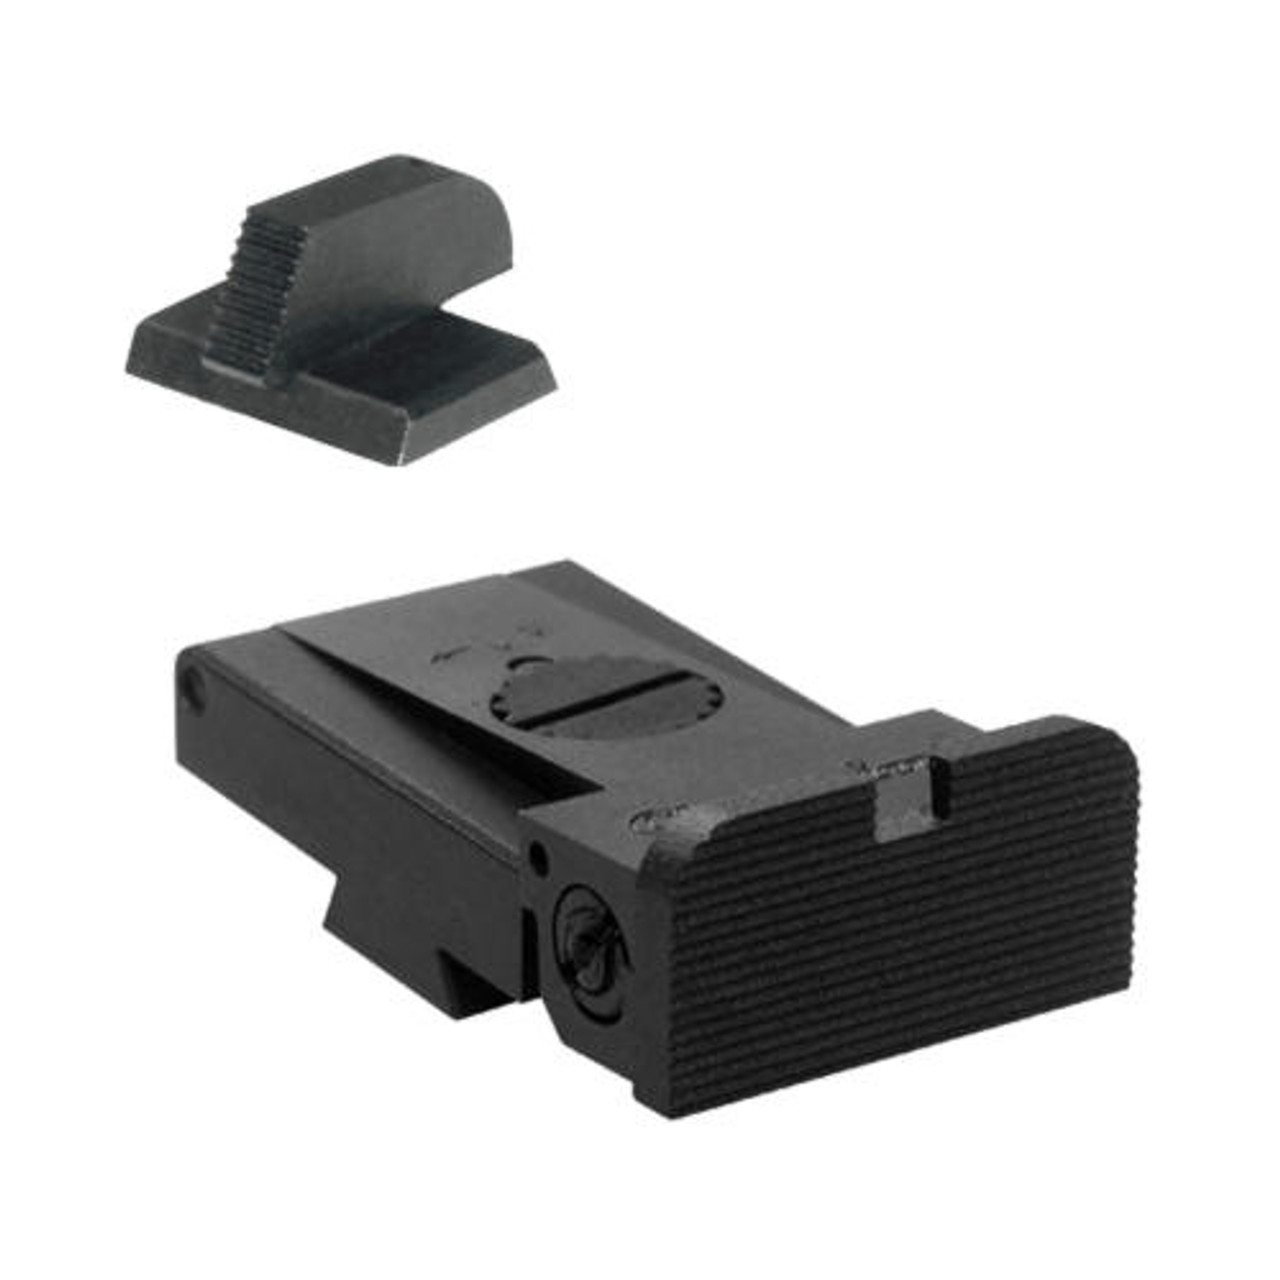 Kensight Kensight Target 1911 Sights Rear Sight with Rounded Blade - Fits LPA TRT  Sight Dovetail Cut